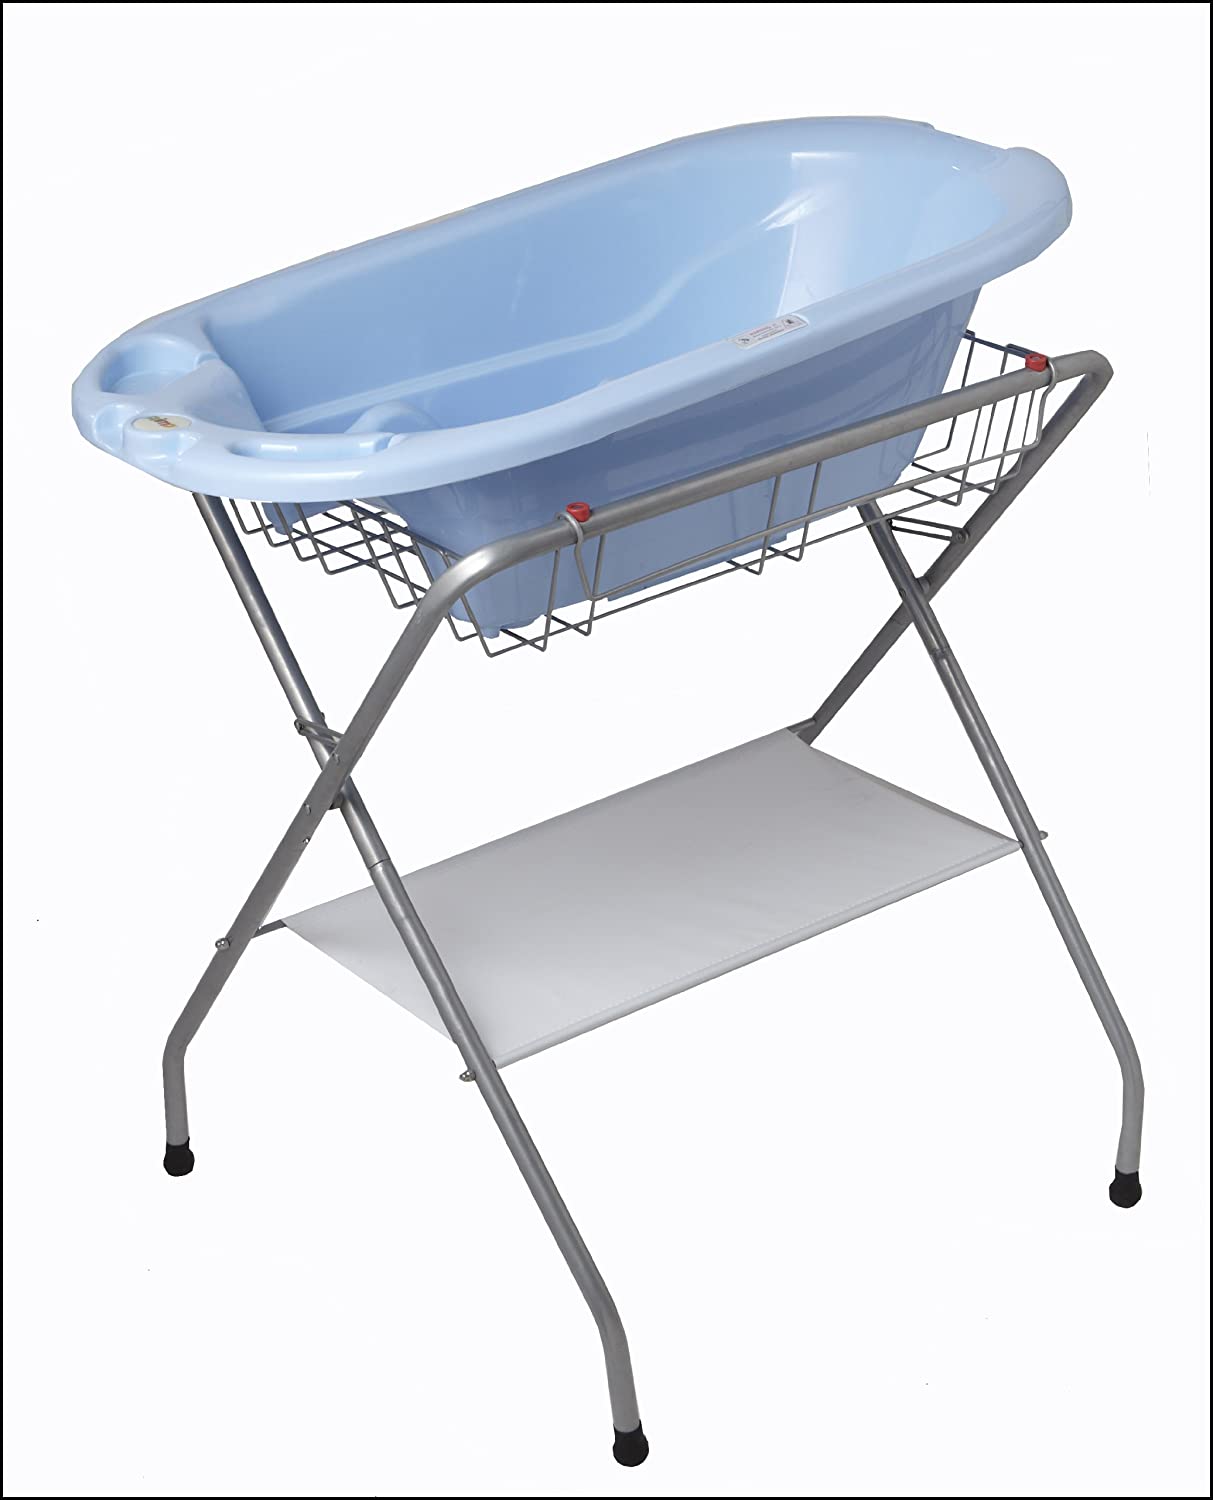 Primo Folding Bath Stand - Lightweight, Easy to Store, Helps Relieve Back Strain from Bending, Ages: Months Silver Gray - image 2 of 2